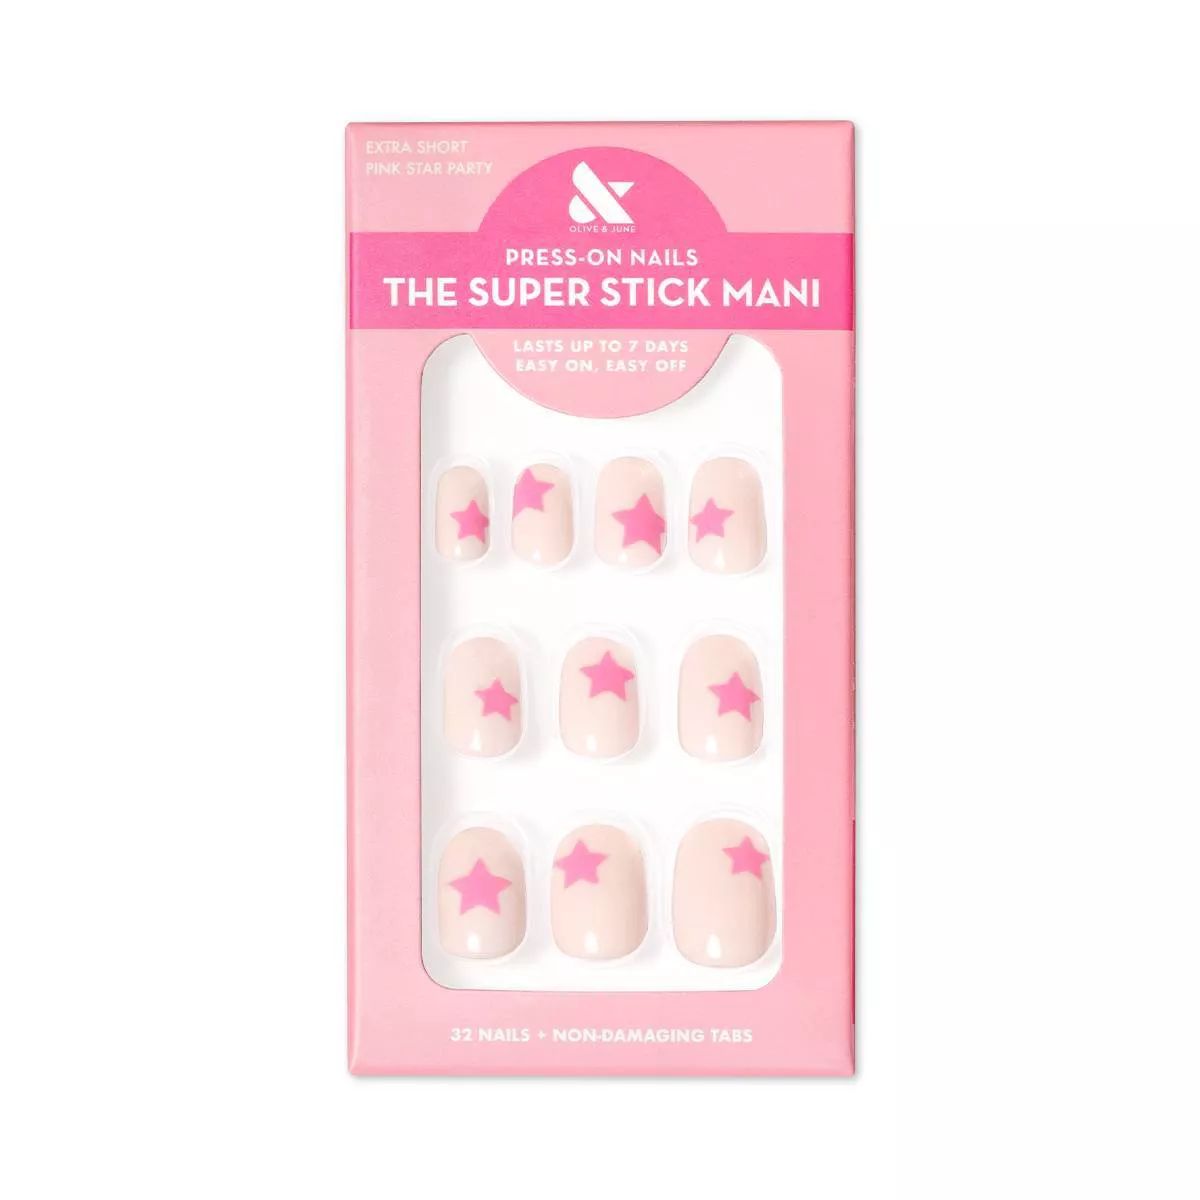 Olive & June Fake Nails - XS Round - Pink Star Party - 32ct: Super Stick Press-On Mani, Gloss Fin... | Target